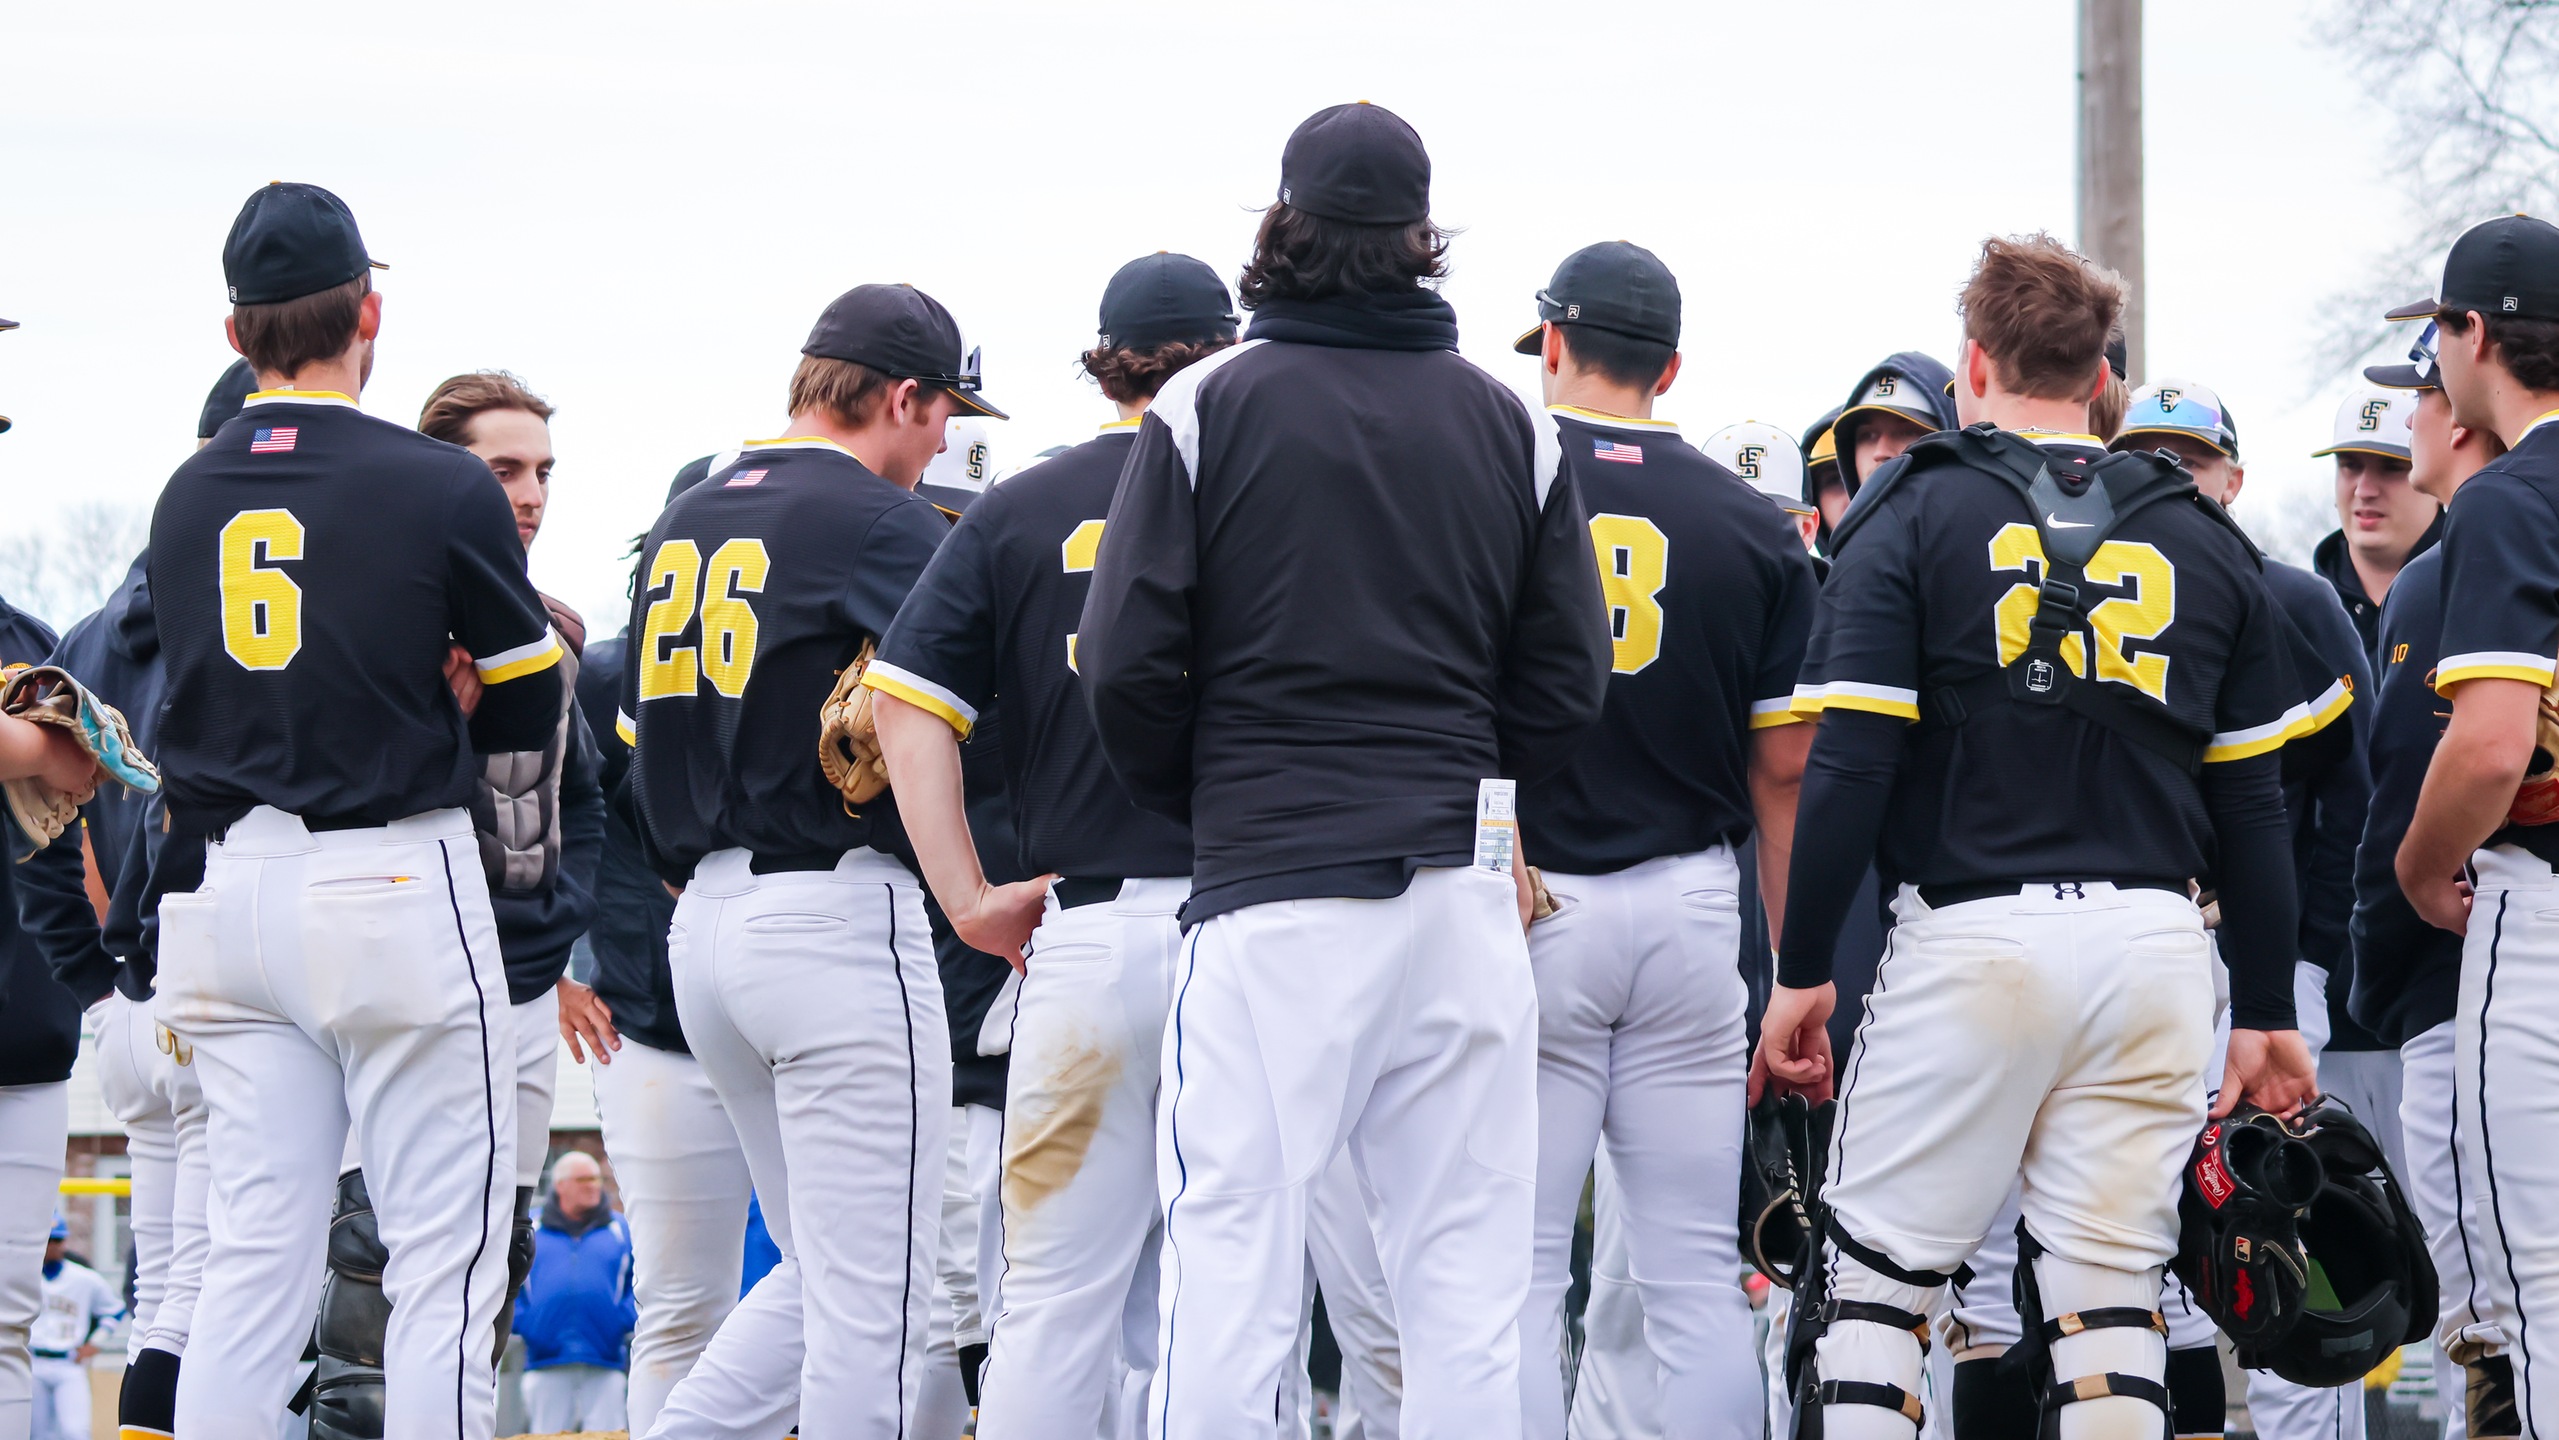 Third Seed Baseball Eliminated from MASCAC Tournament by Sixth Seed Worcester State